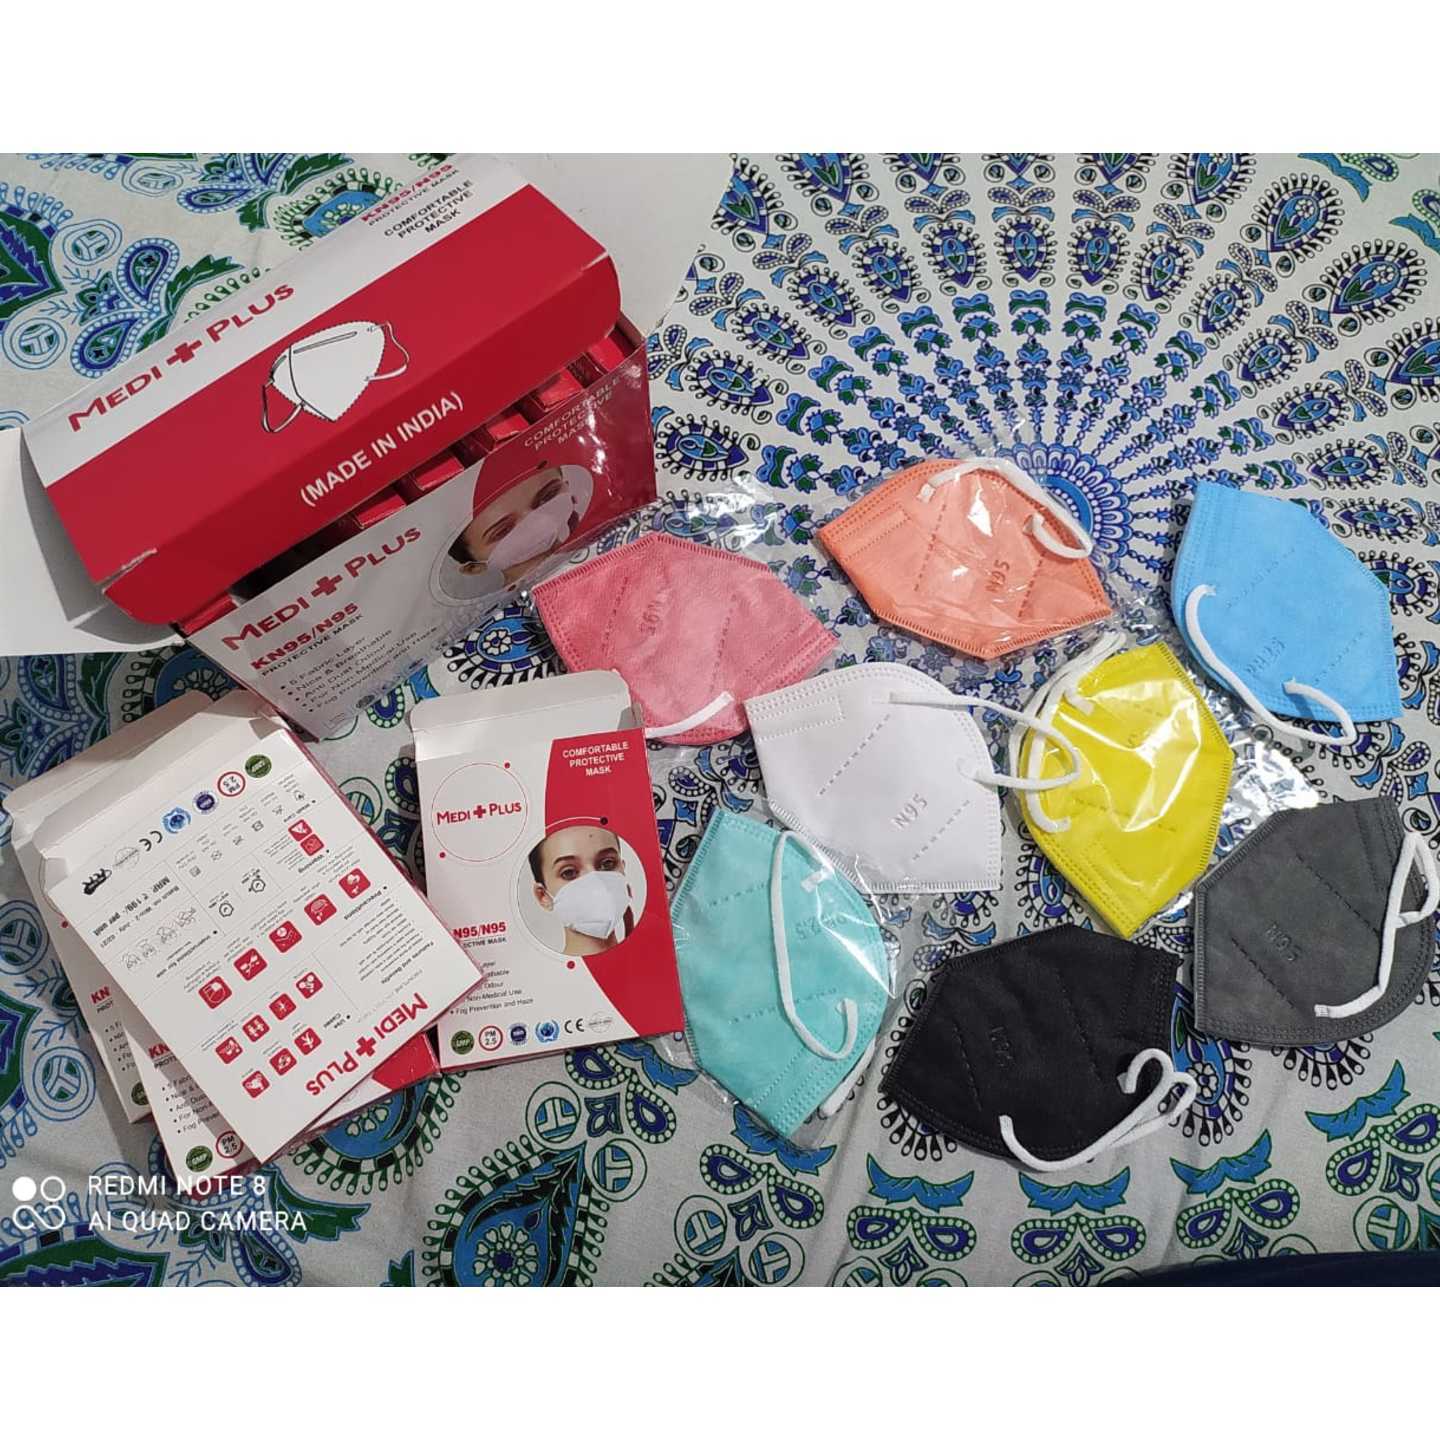 N95 Mask 2 Pcs Pack , Washable and Reusable N95 Masks without Valve, Comfortable Stylish N95 6 Layer 2 Pcs Pack for Men and Women